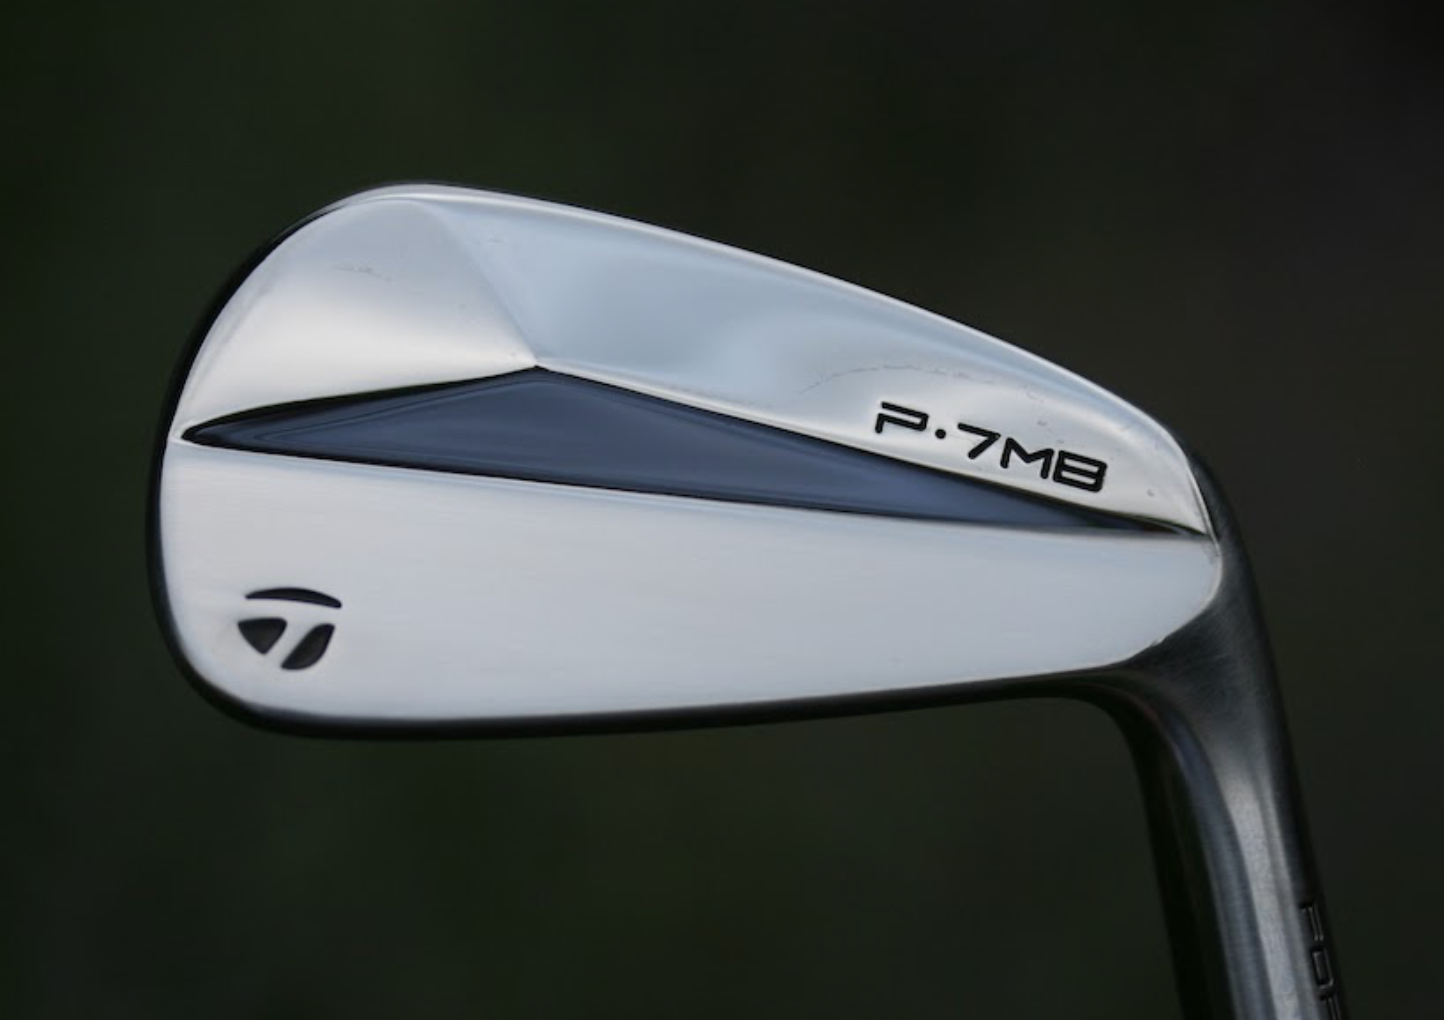 The new 2020 TaylorMade P7MB irons